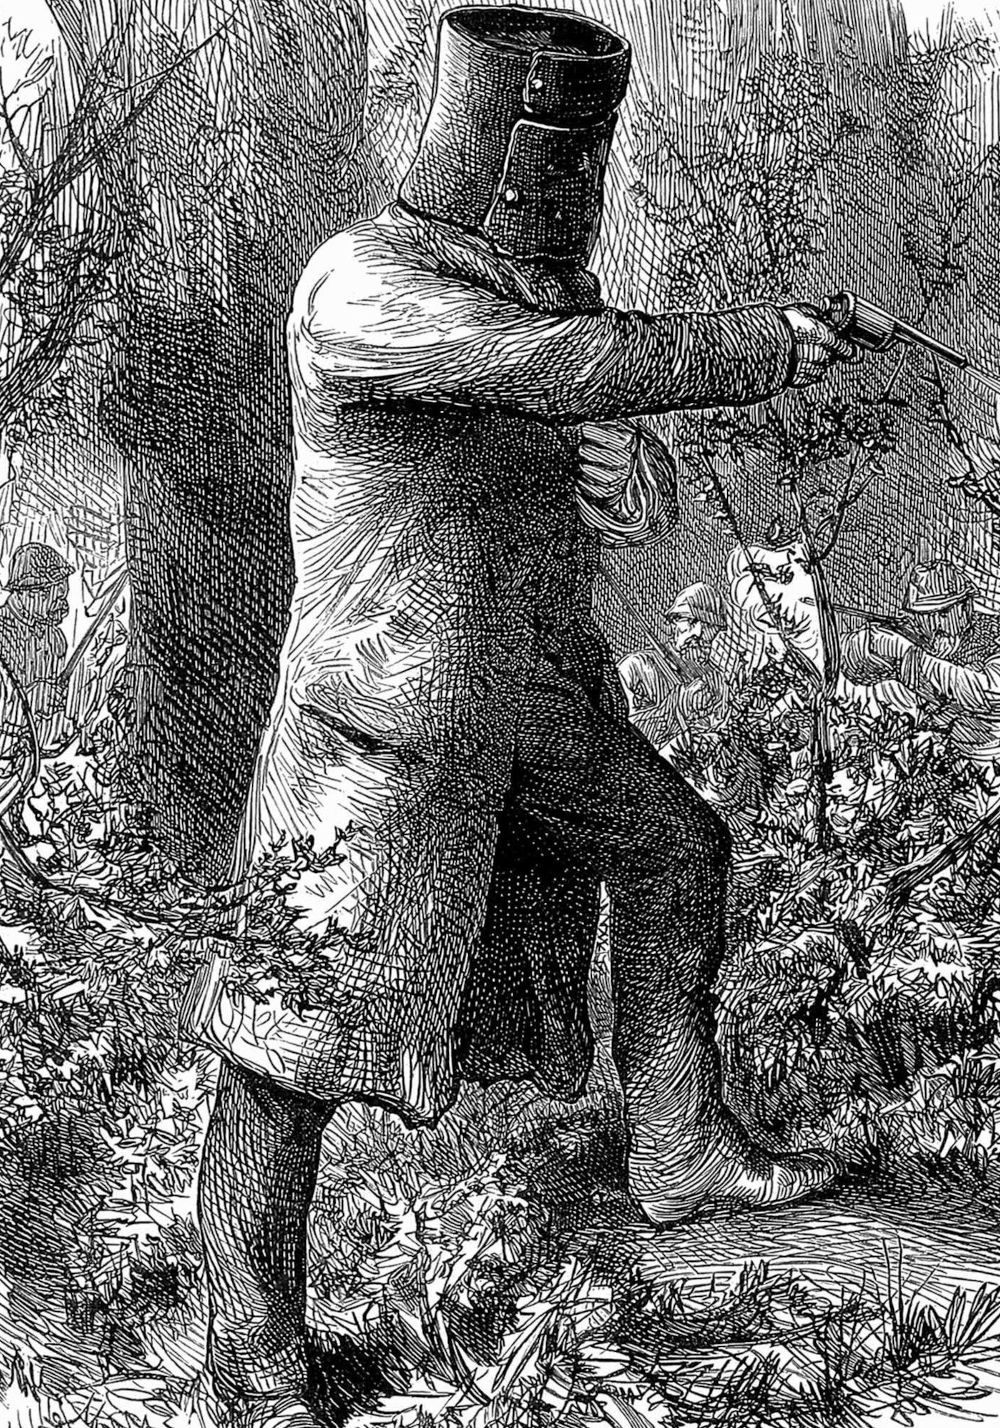 Ned Kelly in his armour from the Illustrated London News September 1880